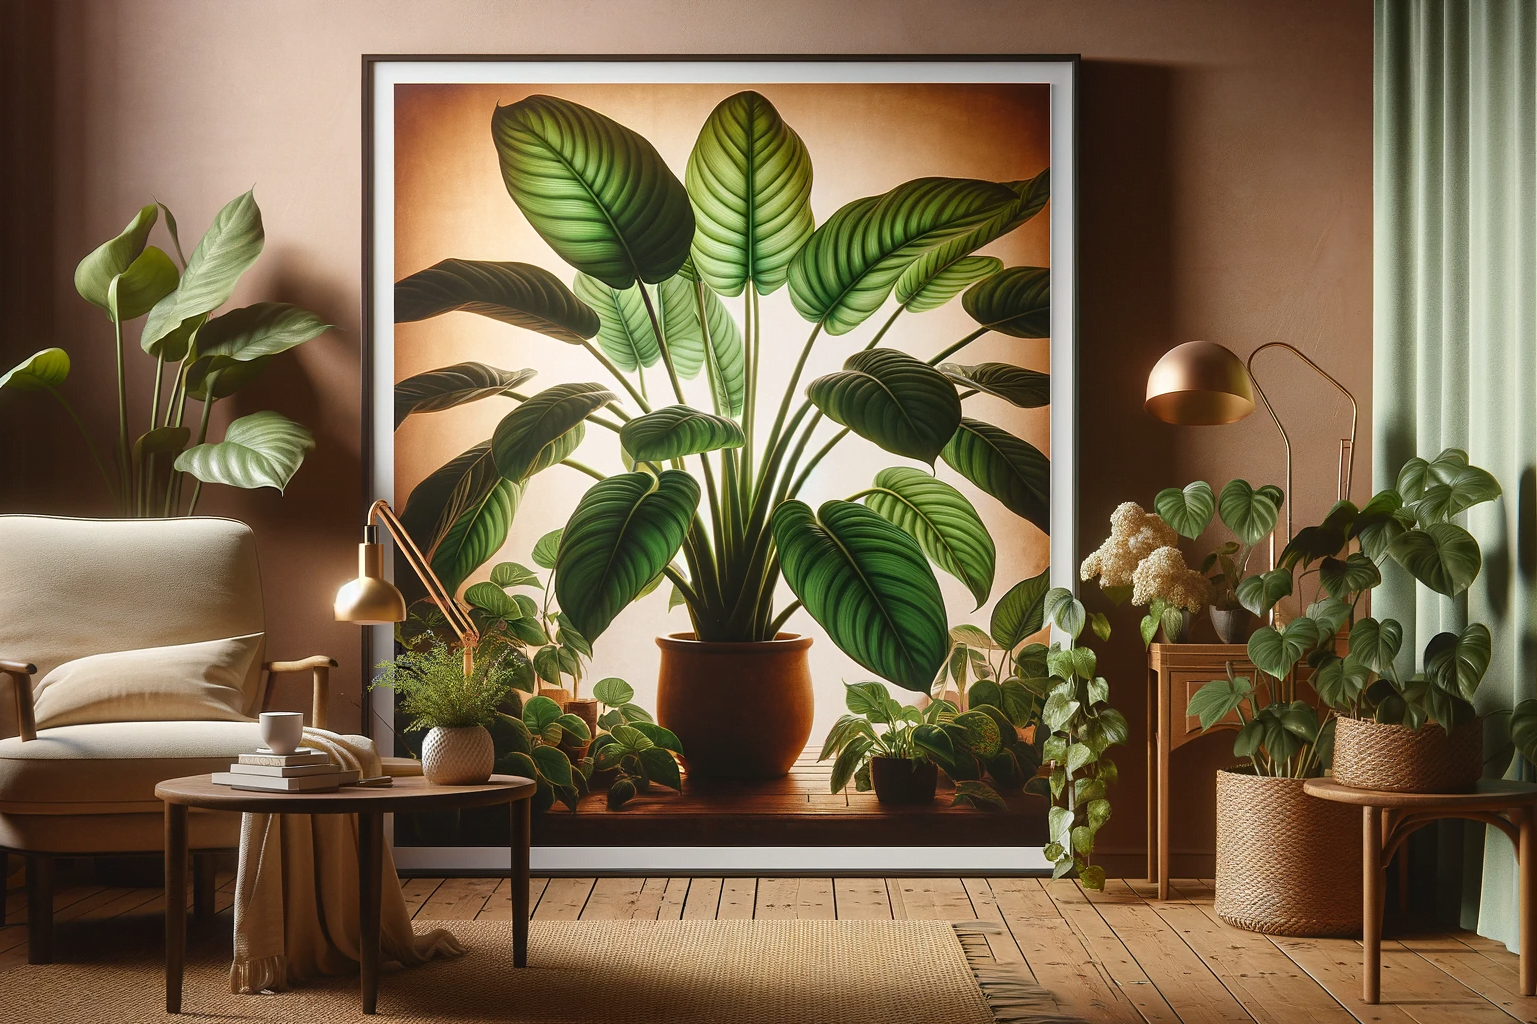 Vibrant Philodendron Congo Green plant in an elegant indoor garden setting.